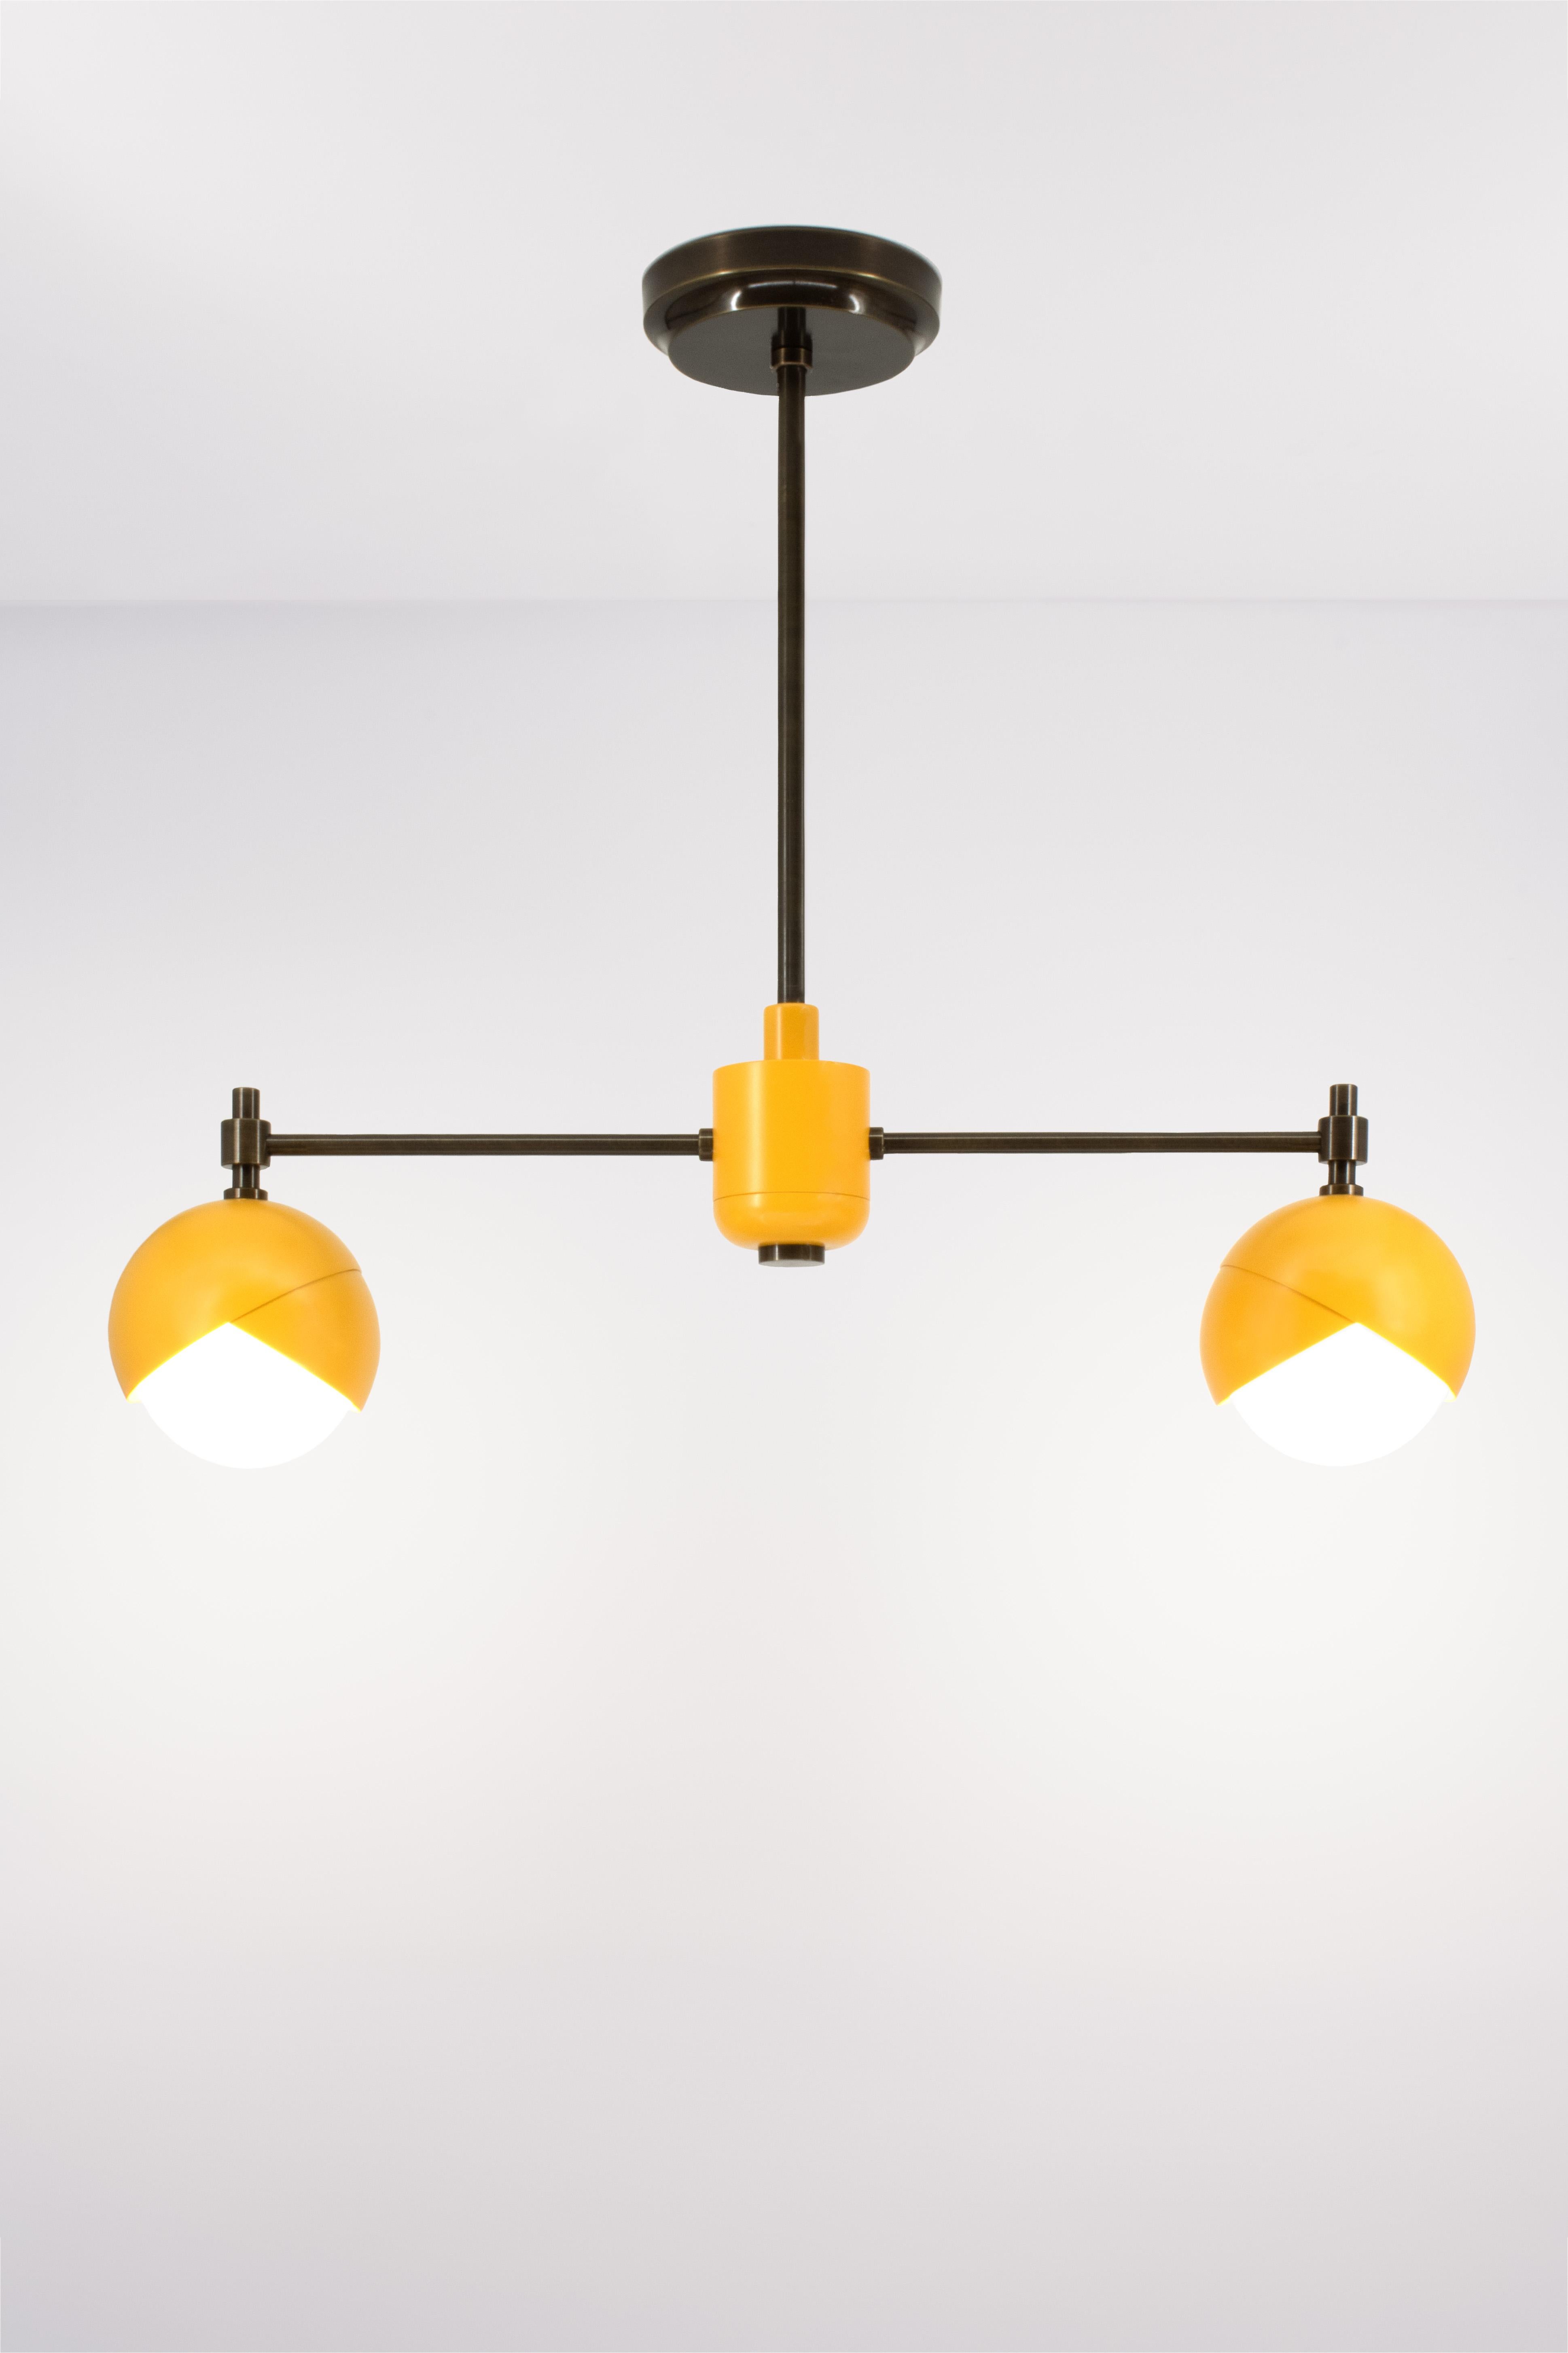 Benedict Two Light Chandelier in Yellow Powder Coat and Brown Brass In New Condition For Sale In Brooklyn, NY